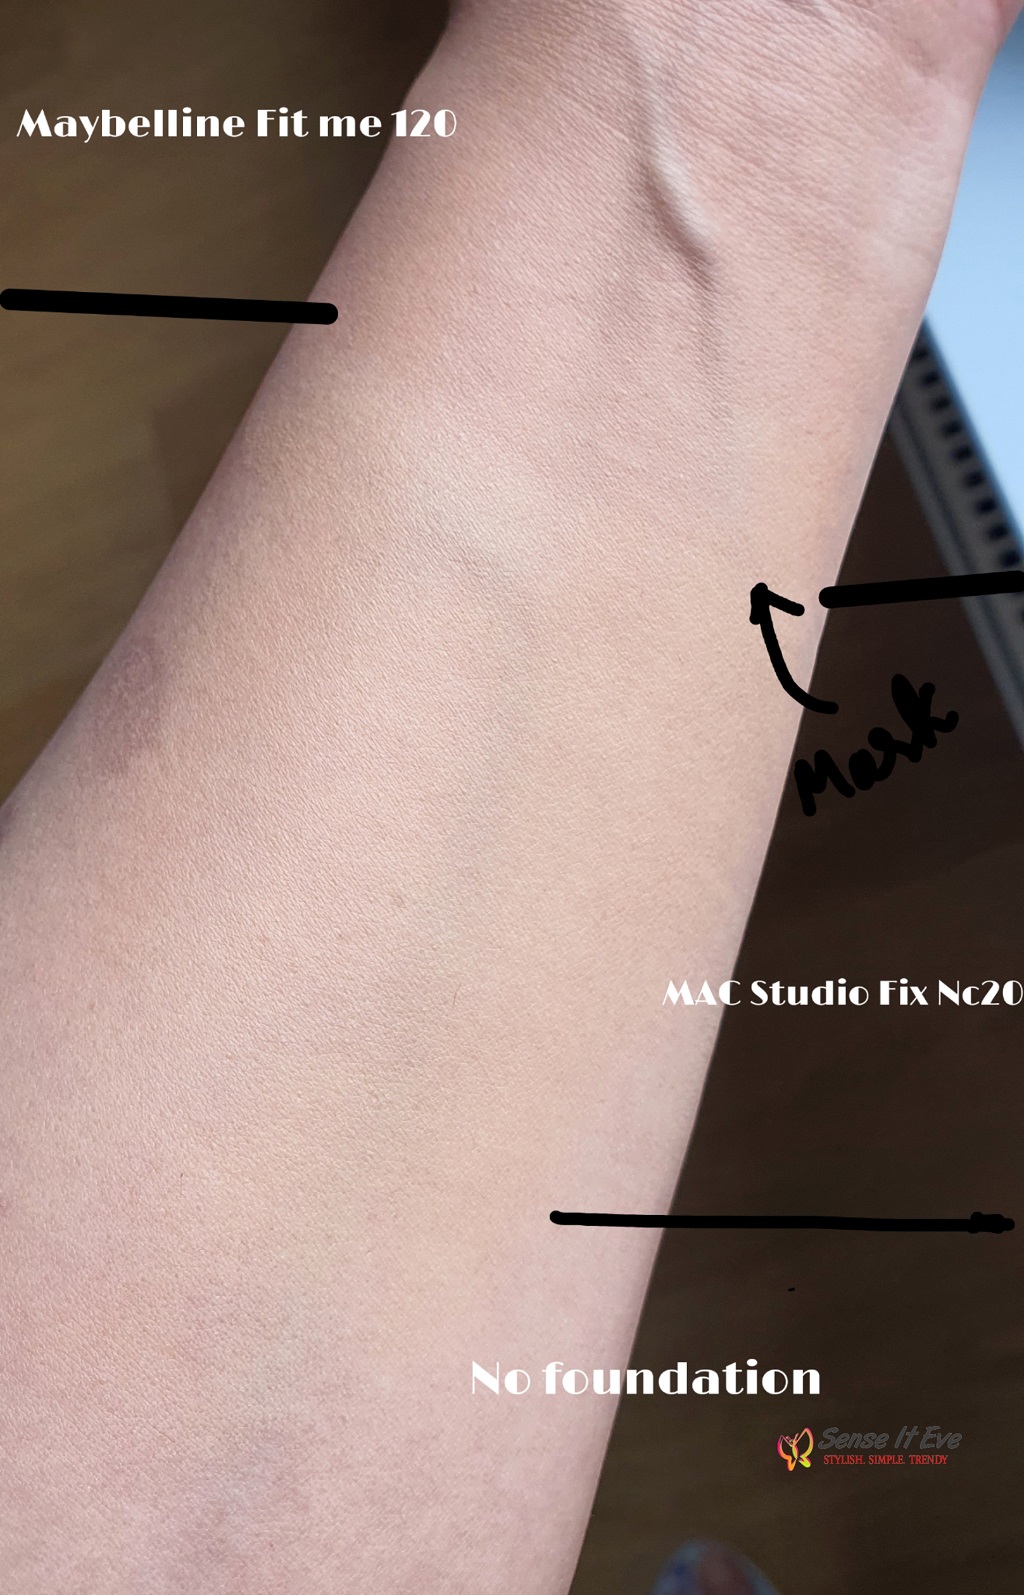 Maybelline Fit Me Matte Poreless Foundation 120 Classic Ivory vs MAC Studio Fix NC20 Blended on Skin Sense It Eve Maybelline Fit Me Matte + Poreless Foundation Review